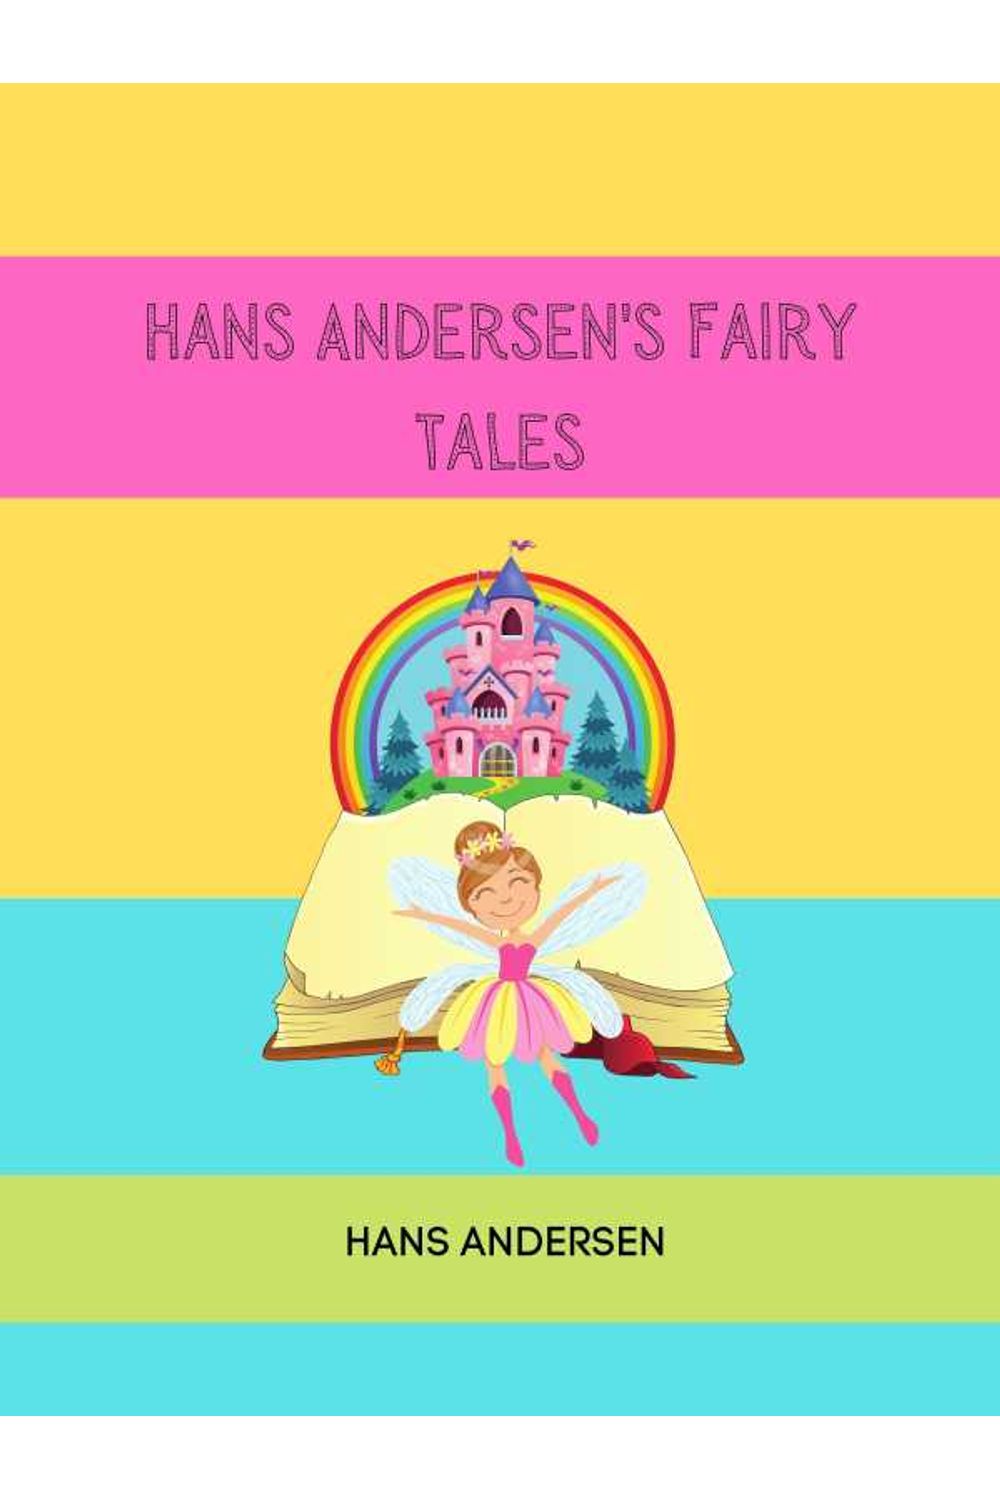 bw-hans-andersens-fairy-tales-brian-coe-chuck-greif-and-the-online-distributed-proofreading-team-9783986779757